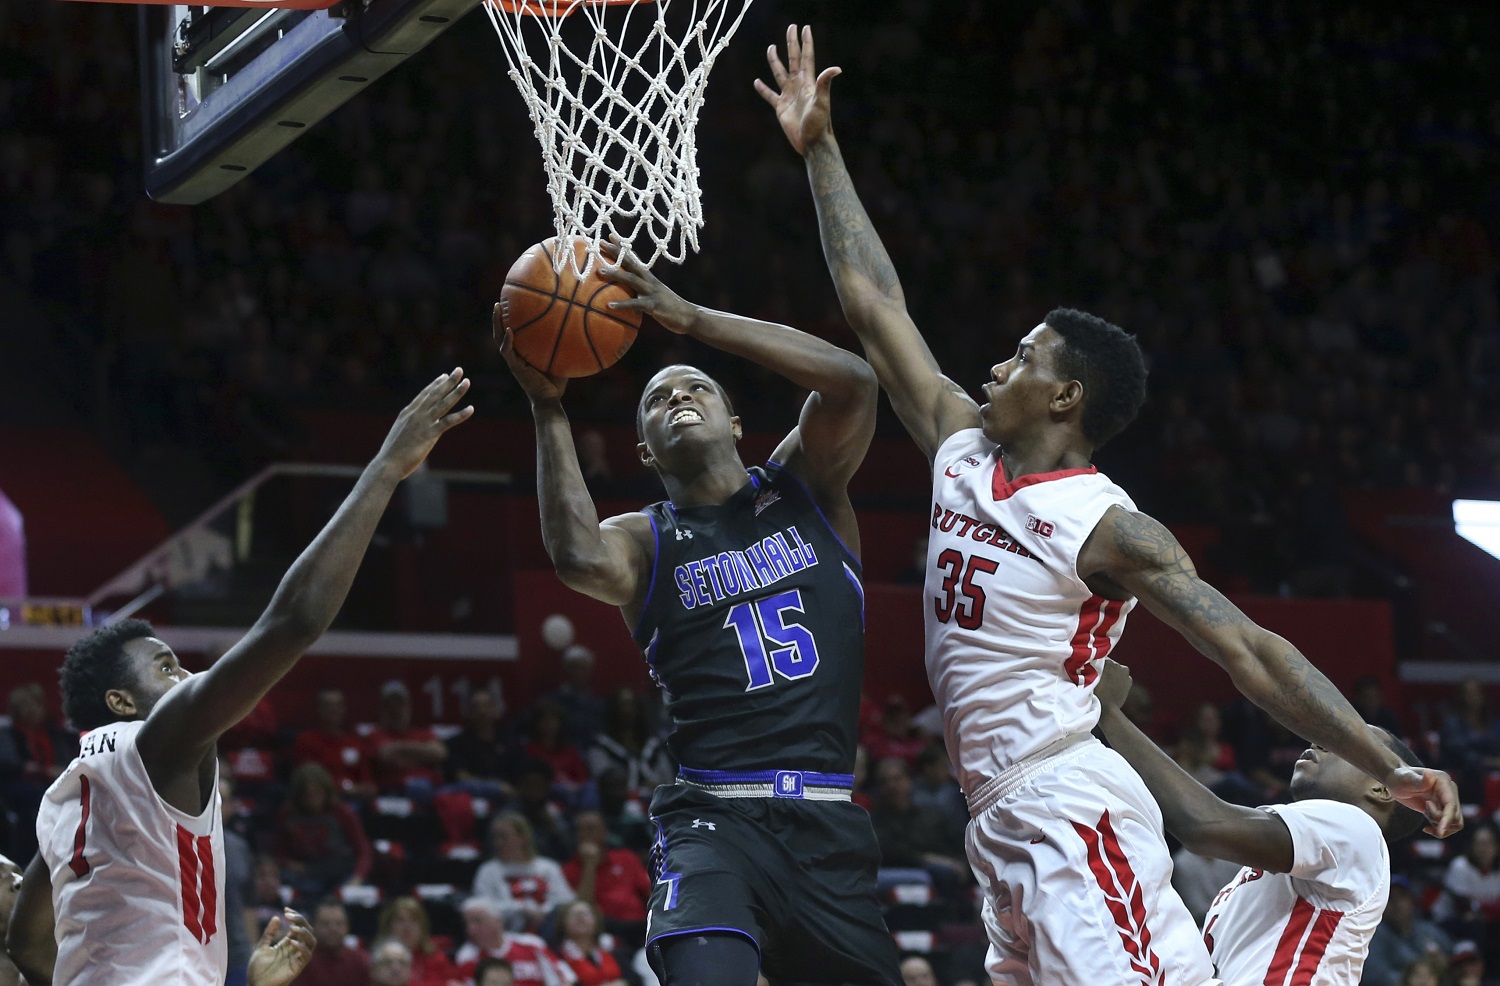 Seton Hall forward Isaiah Whitehead (15) takes a shot as he splits Rutgers defenders Greg Lewis (35) and D.J. Foreman (1) during the first half of an NCAA college basketball game Saturday, Dec. 5, 2015, in Piscataway, N.J. (AP Photo/Mel Evans)